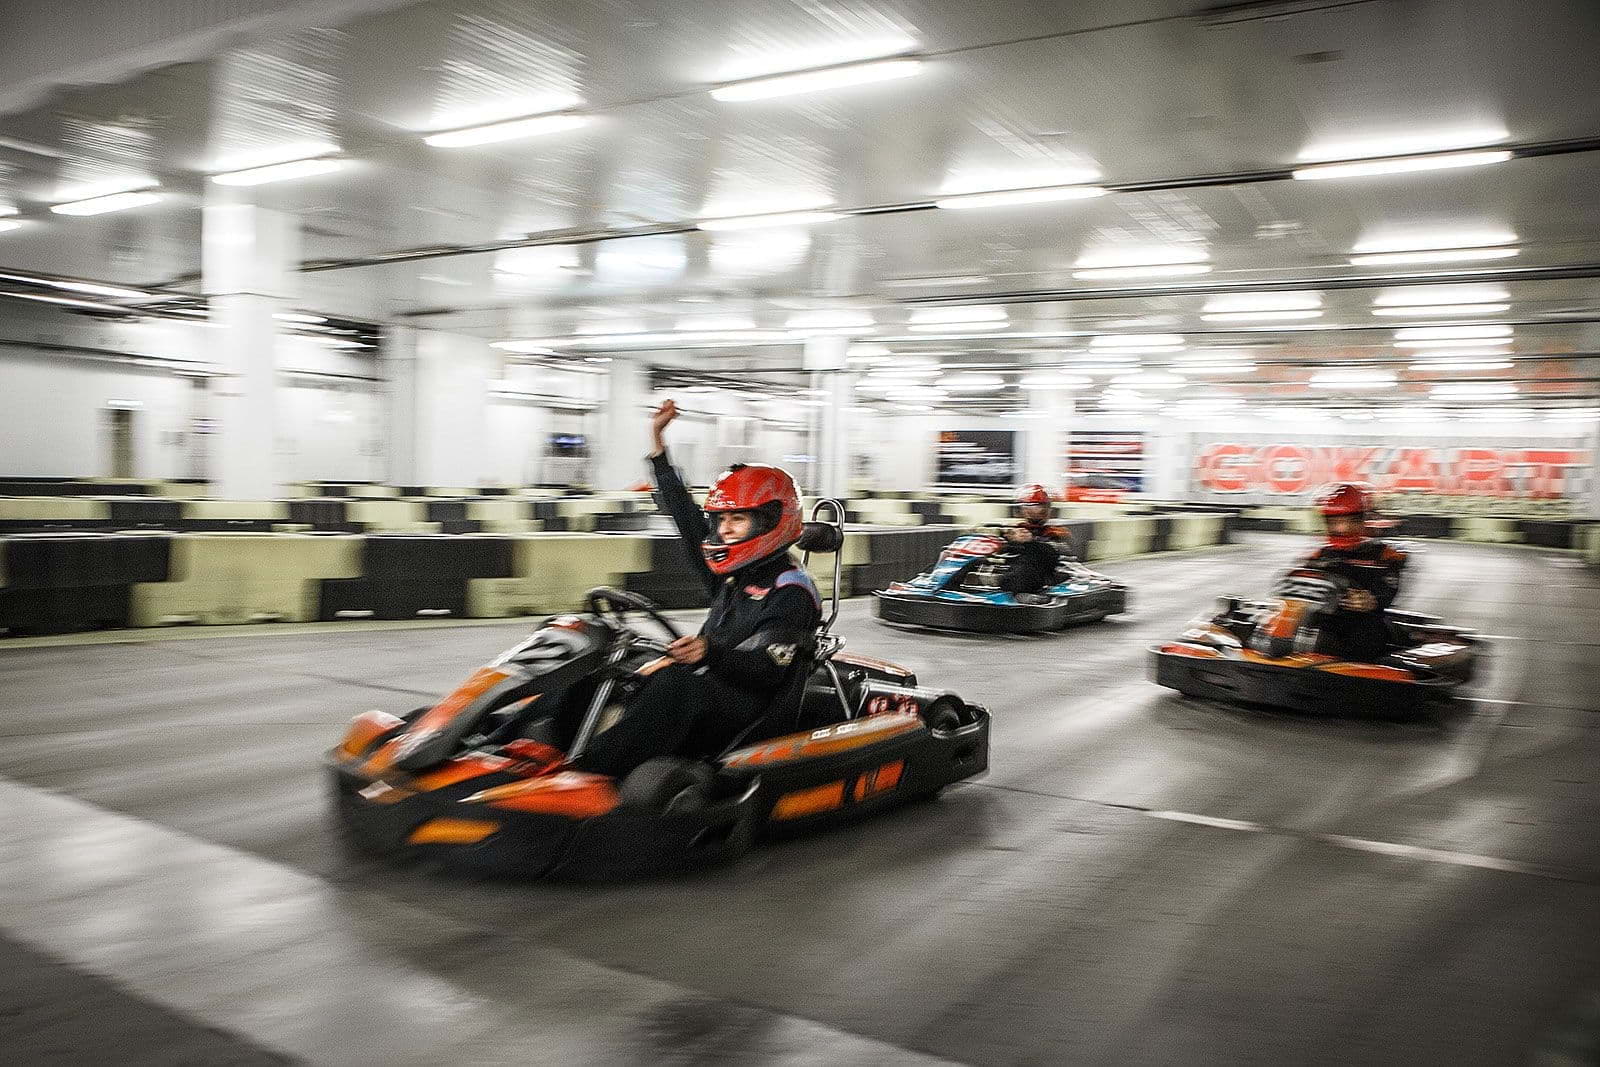 A driver celebrating as they cross the finish line on a go-kart track